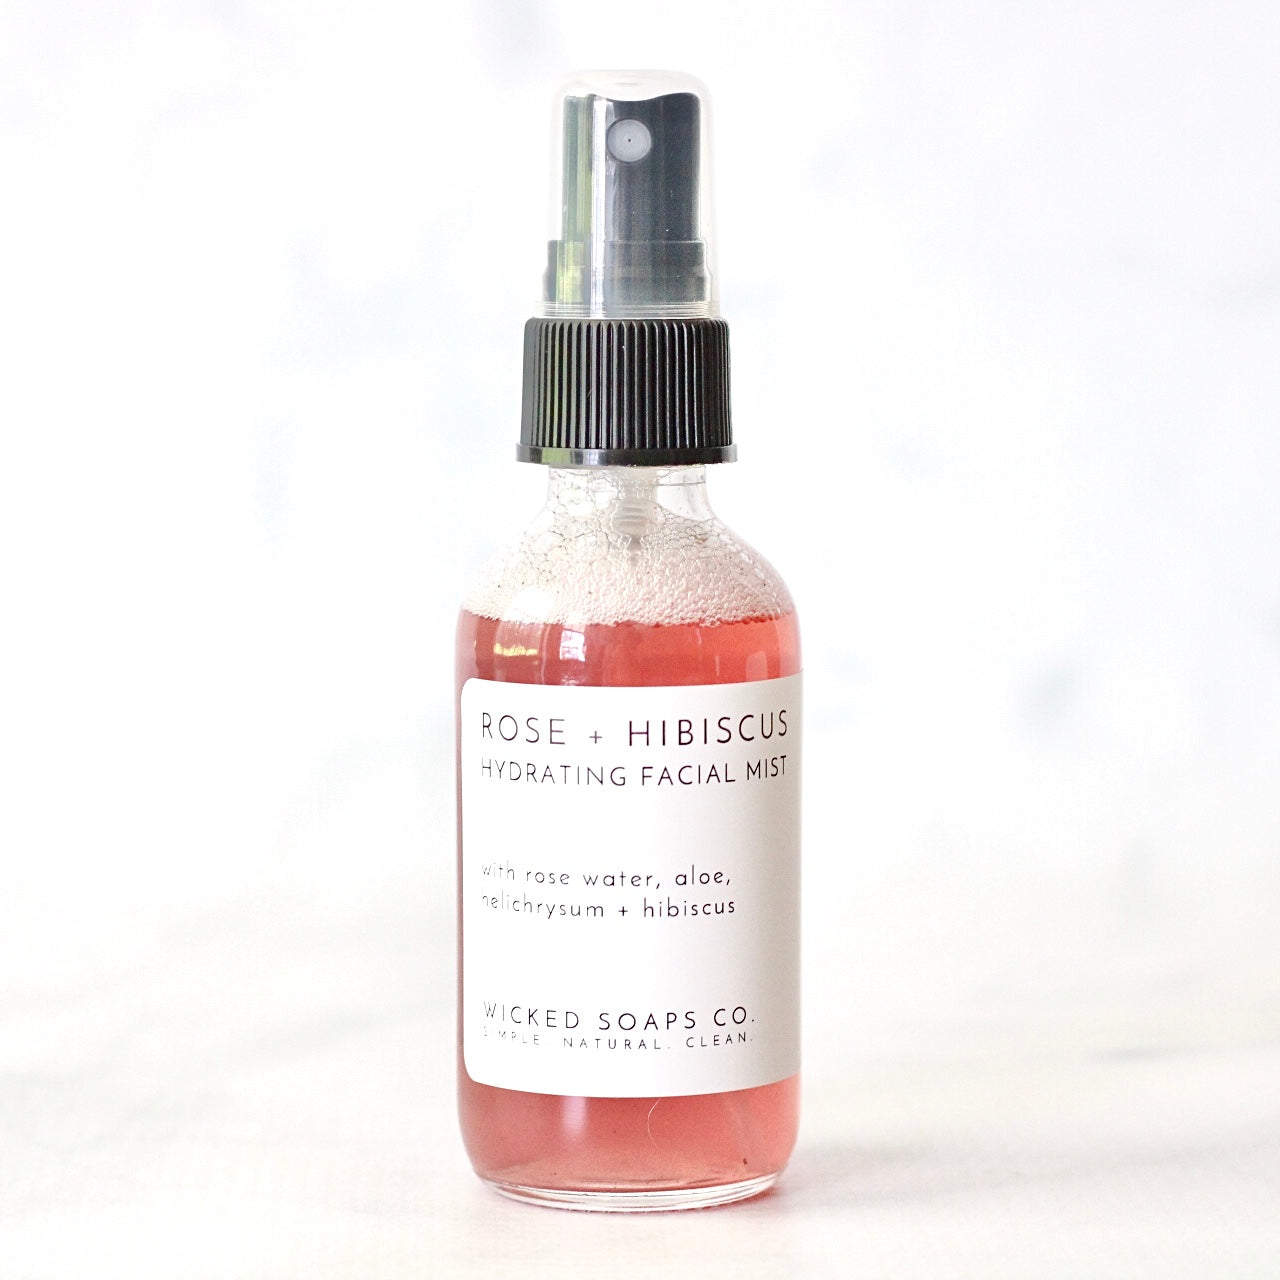 Rose + Hibiscus Hydrating Facial Mist